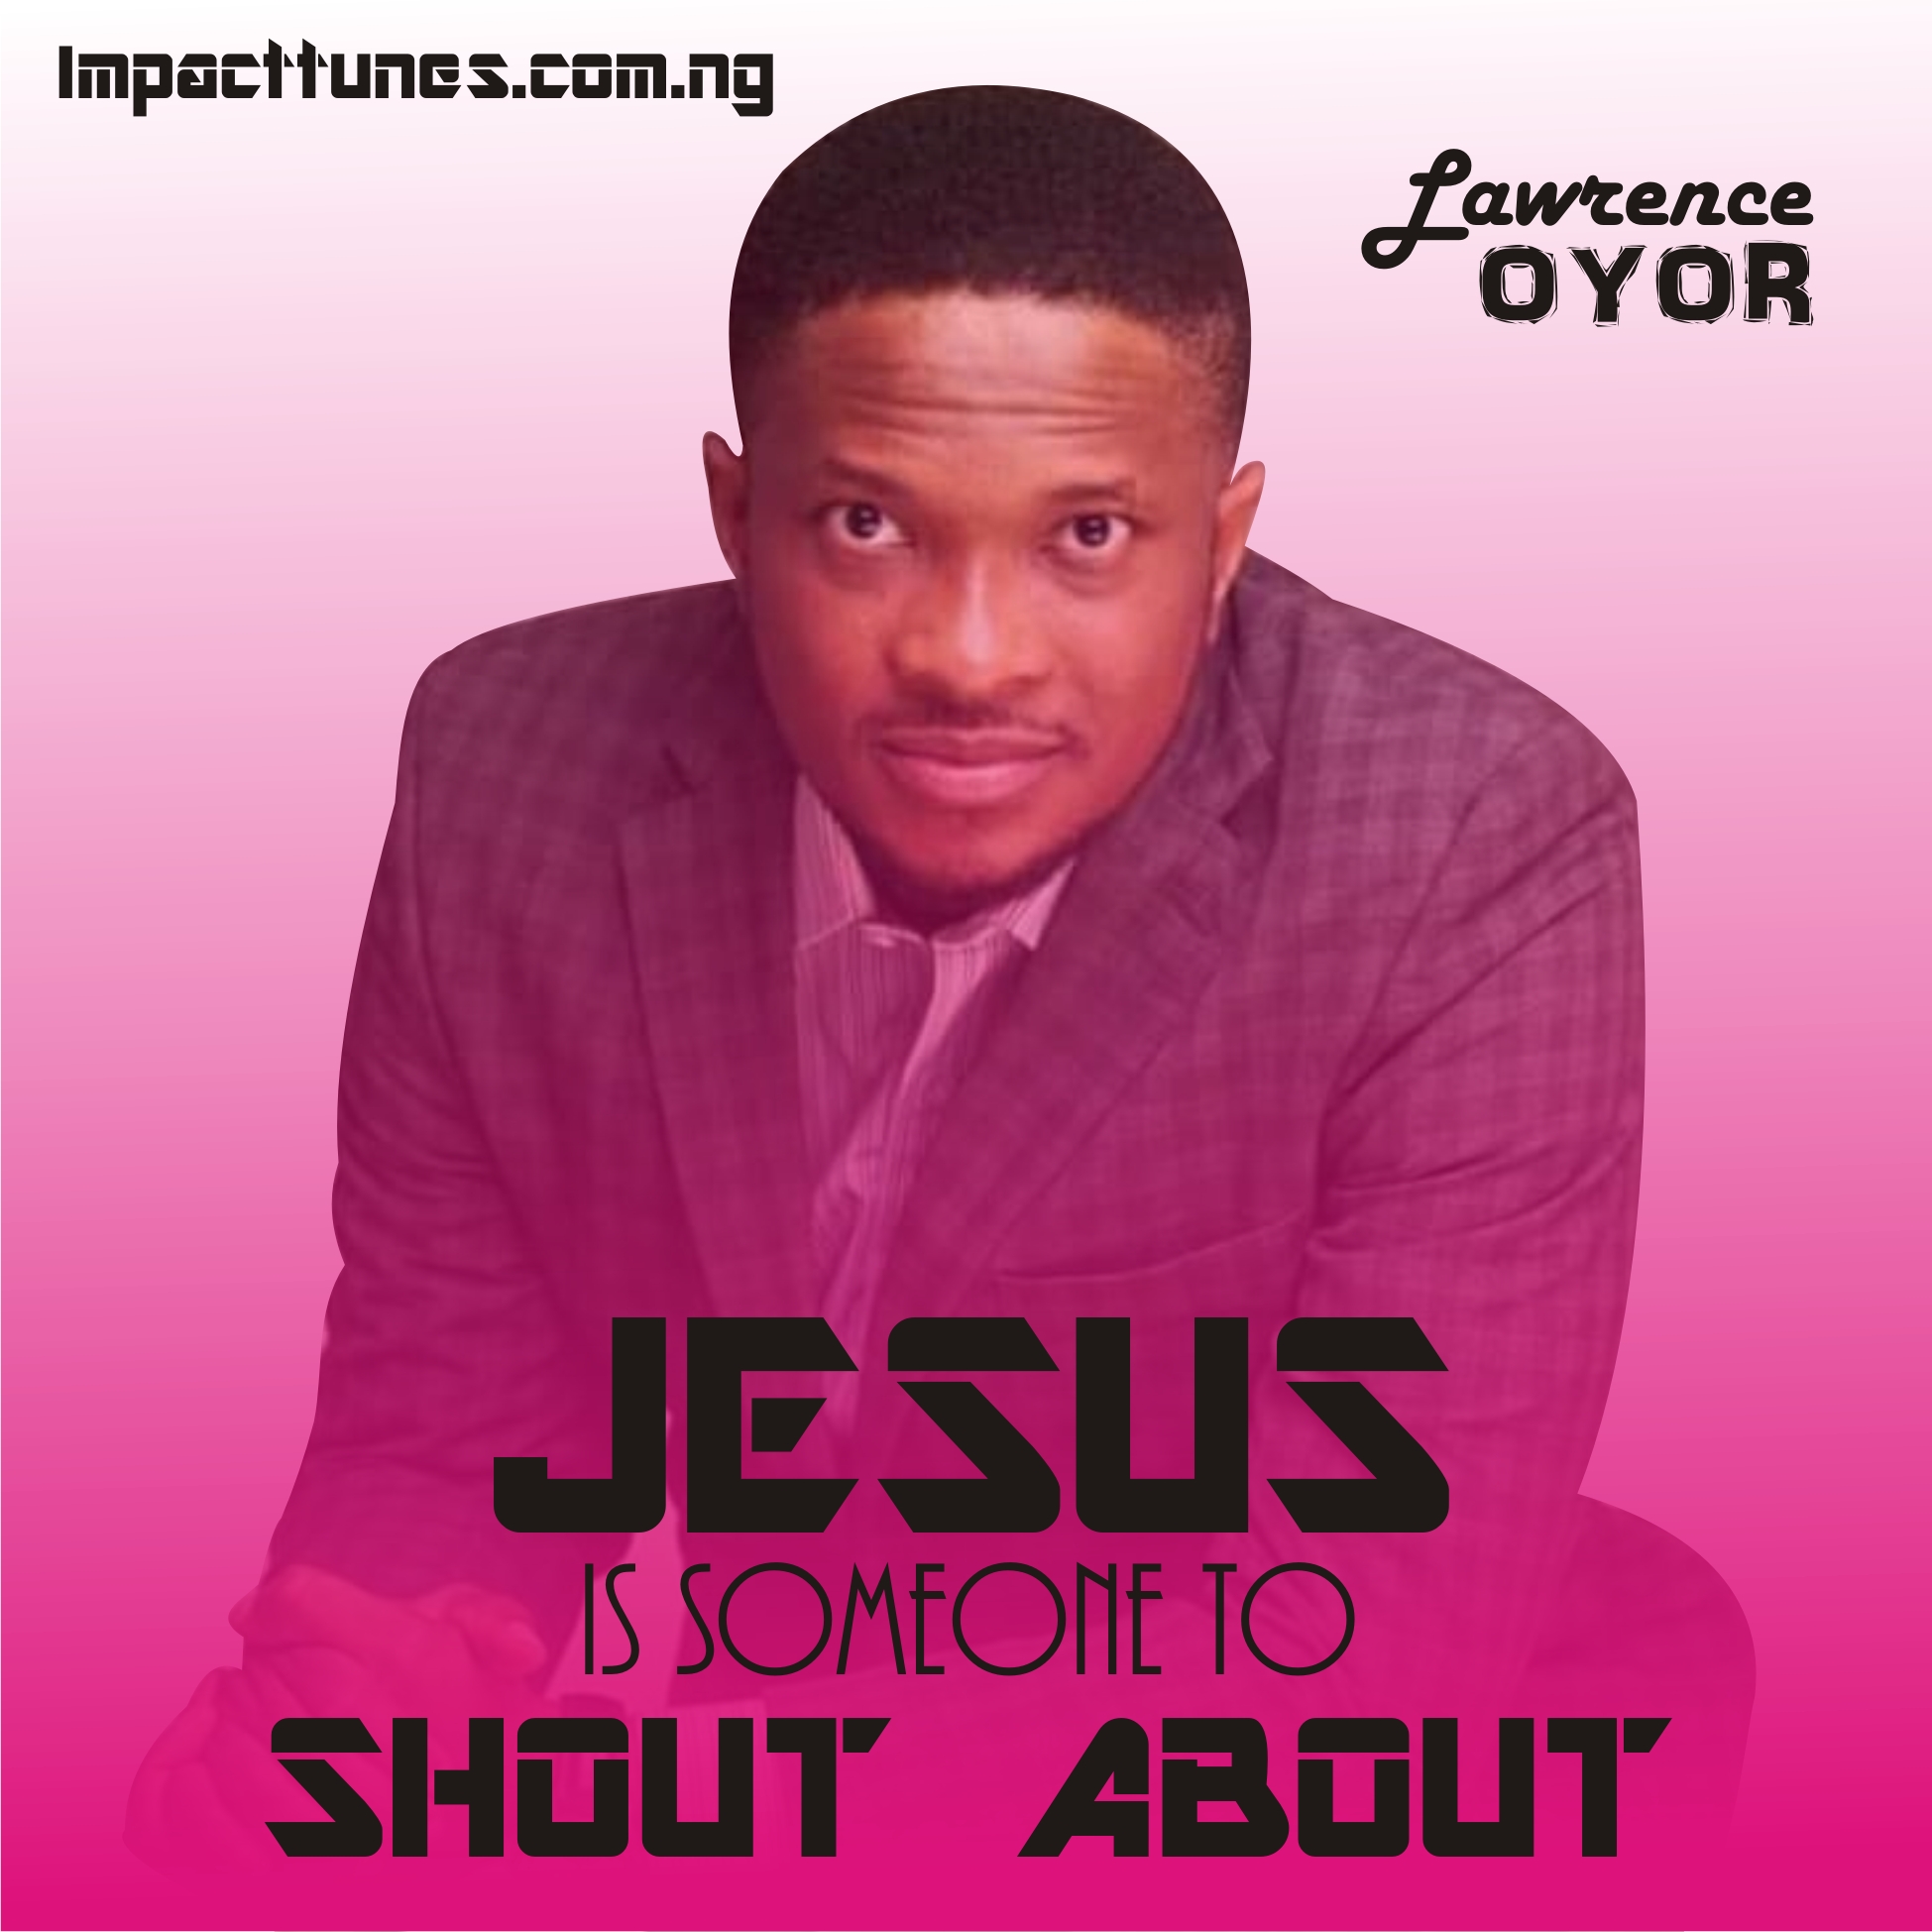 Download Chant: Jesus Is Someone To Shout About | Lawrence Oyor